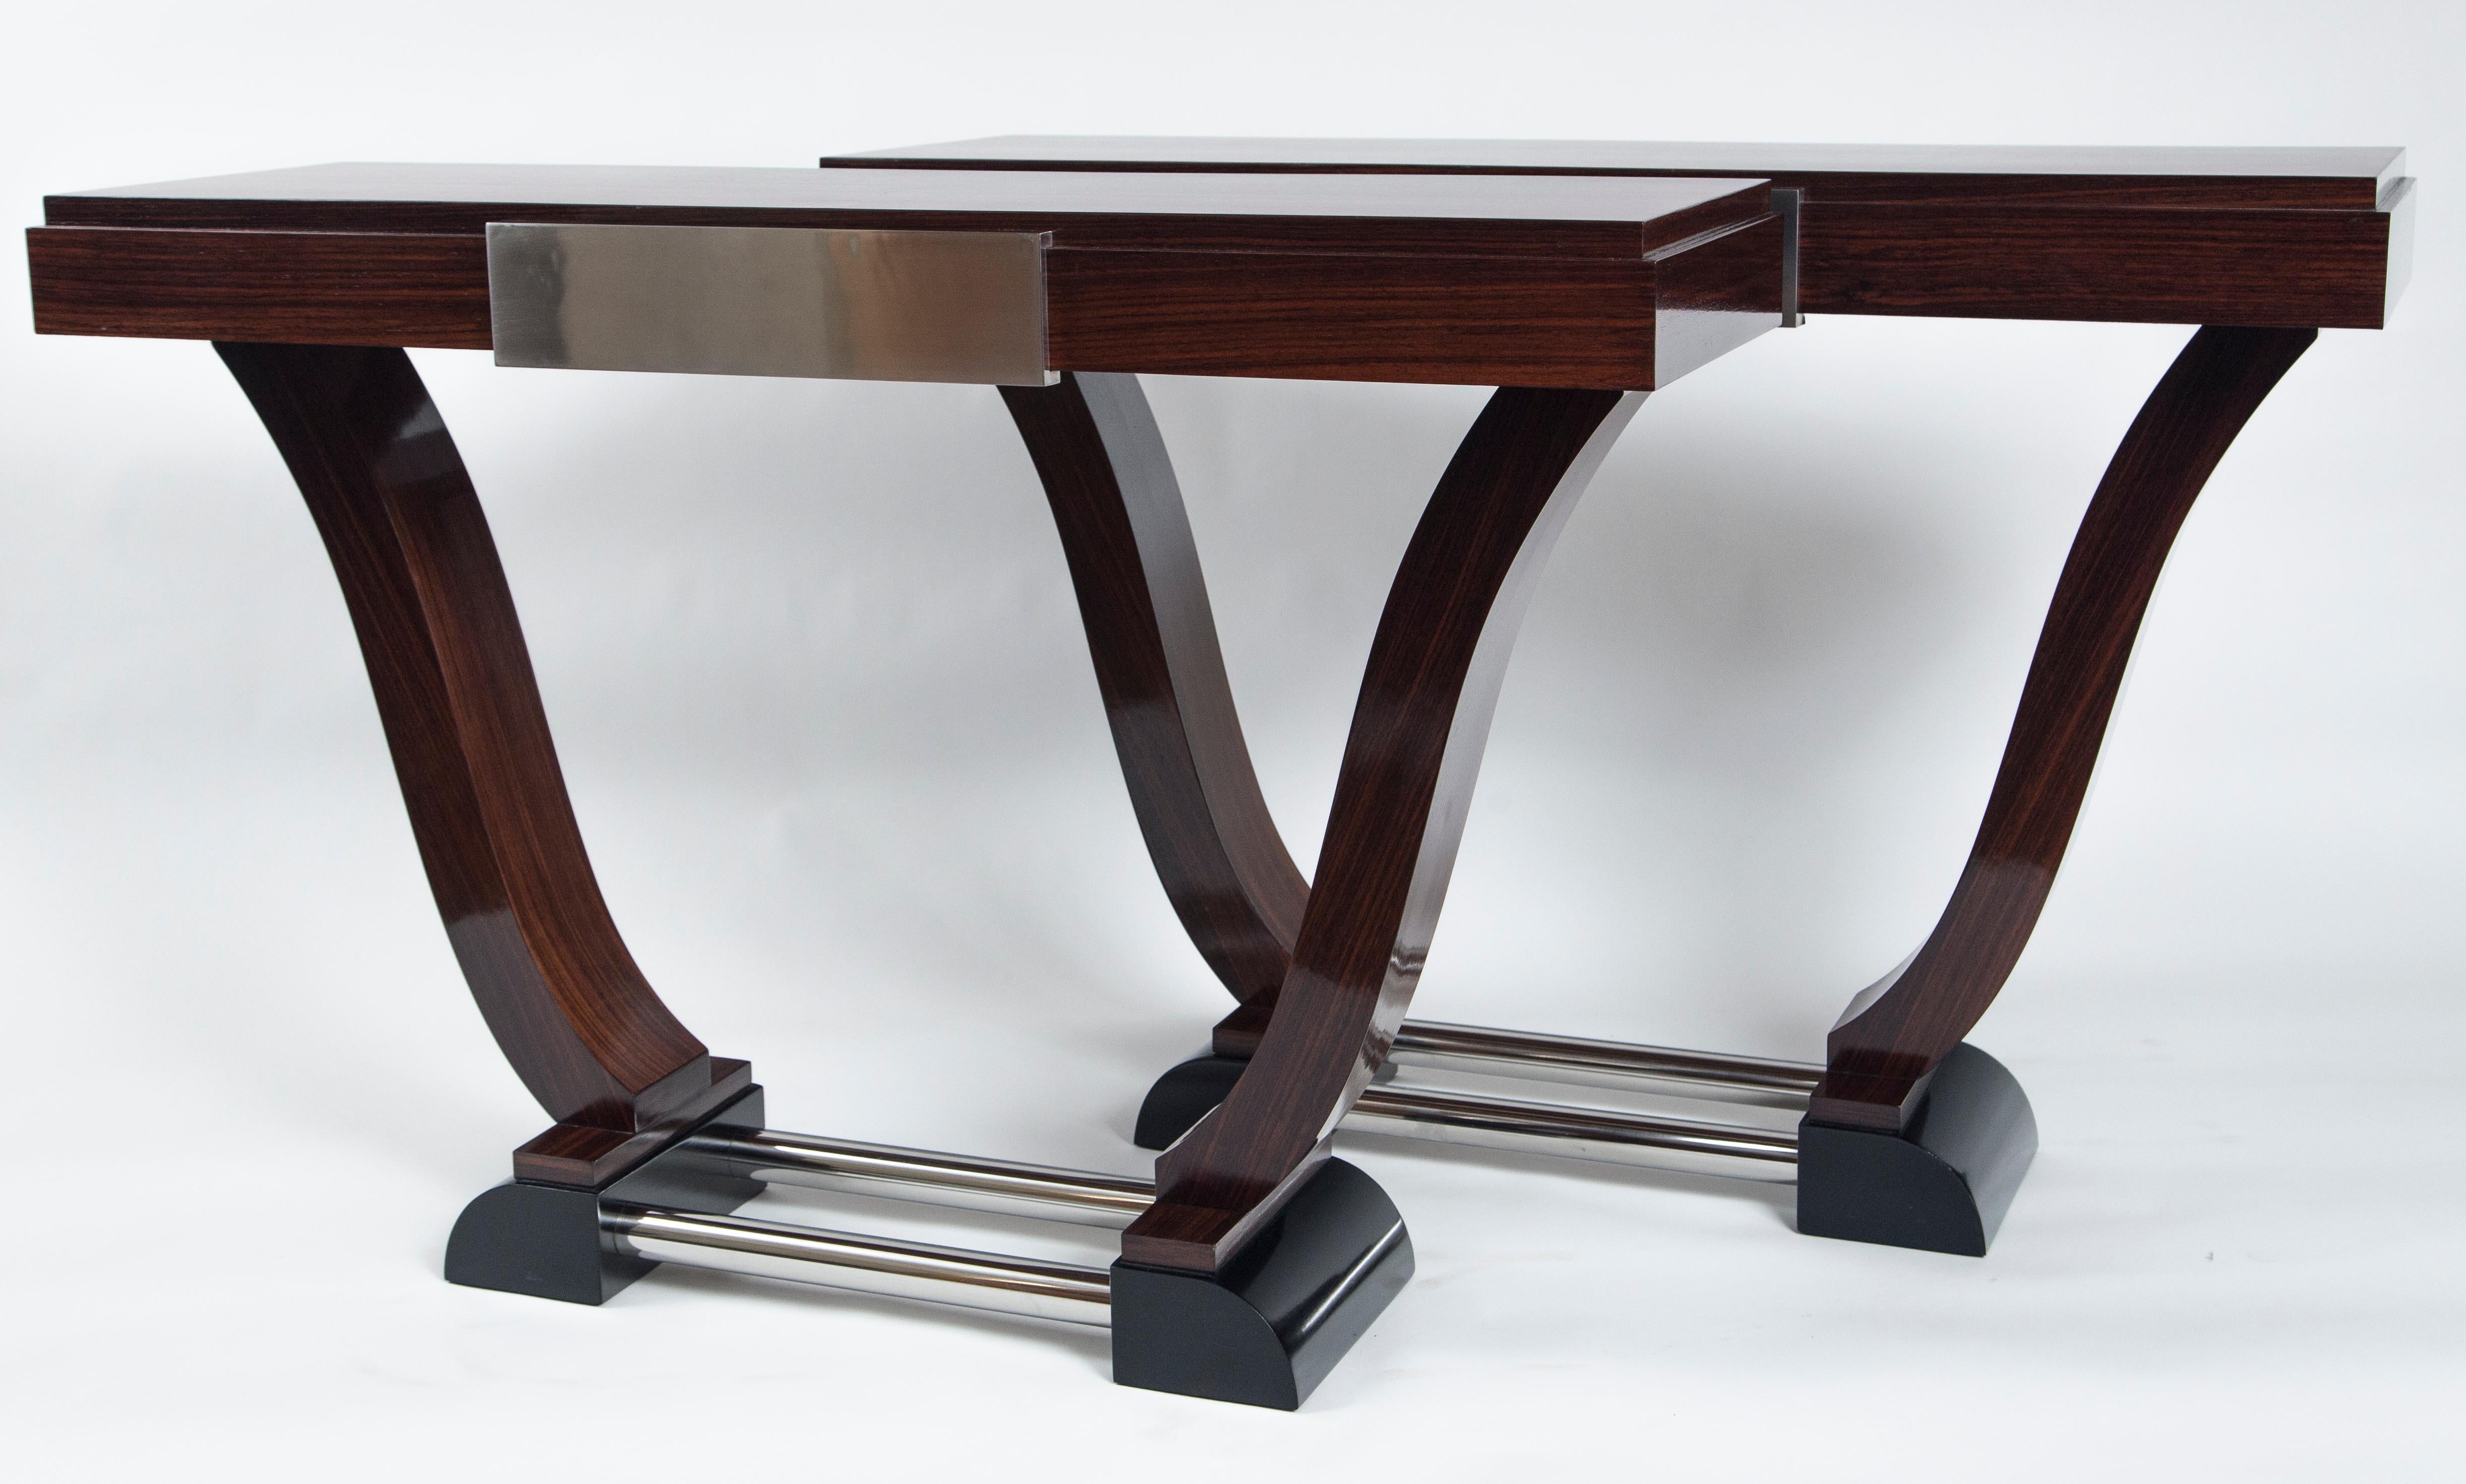 Sleek and unique pair of late Art Deco console tables in rosewood with matte nickel panel detailing in the apron of each rectangular shaped stepped plateau, finishing on vasi shaped base joined by turned nickel tubes.
Priced as a pair
Origin: